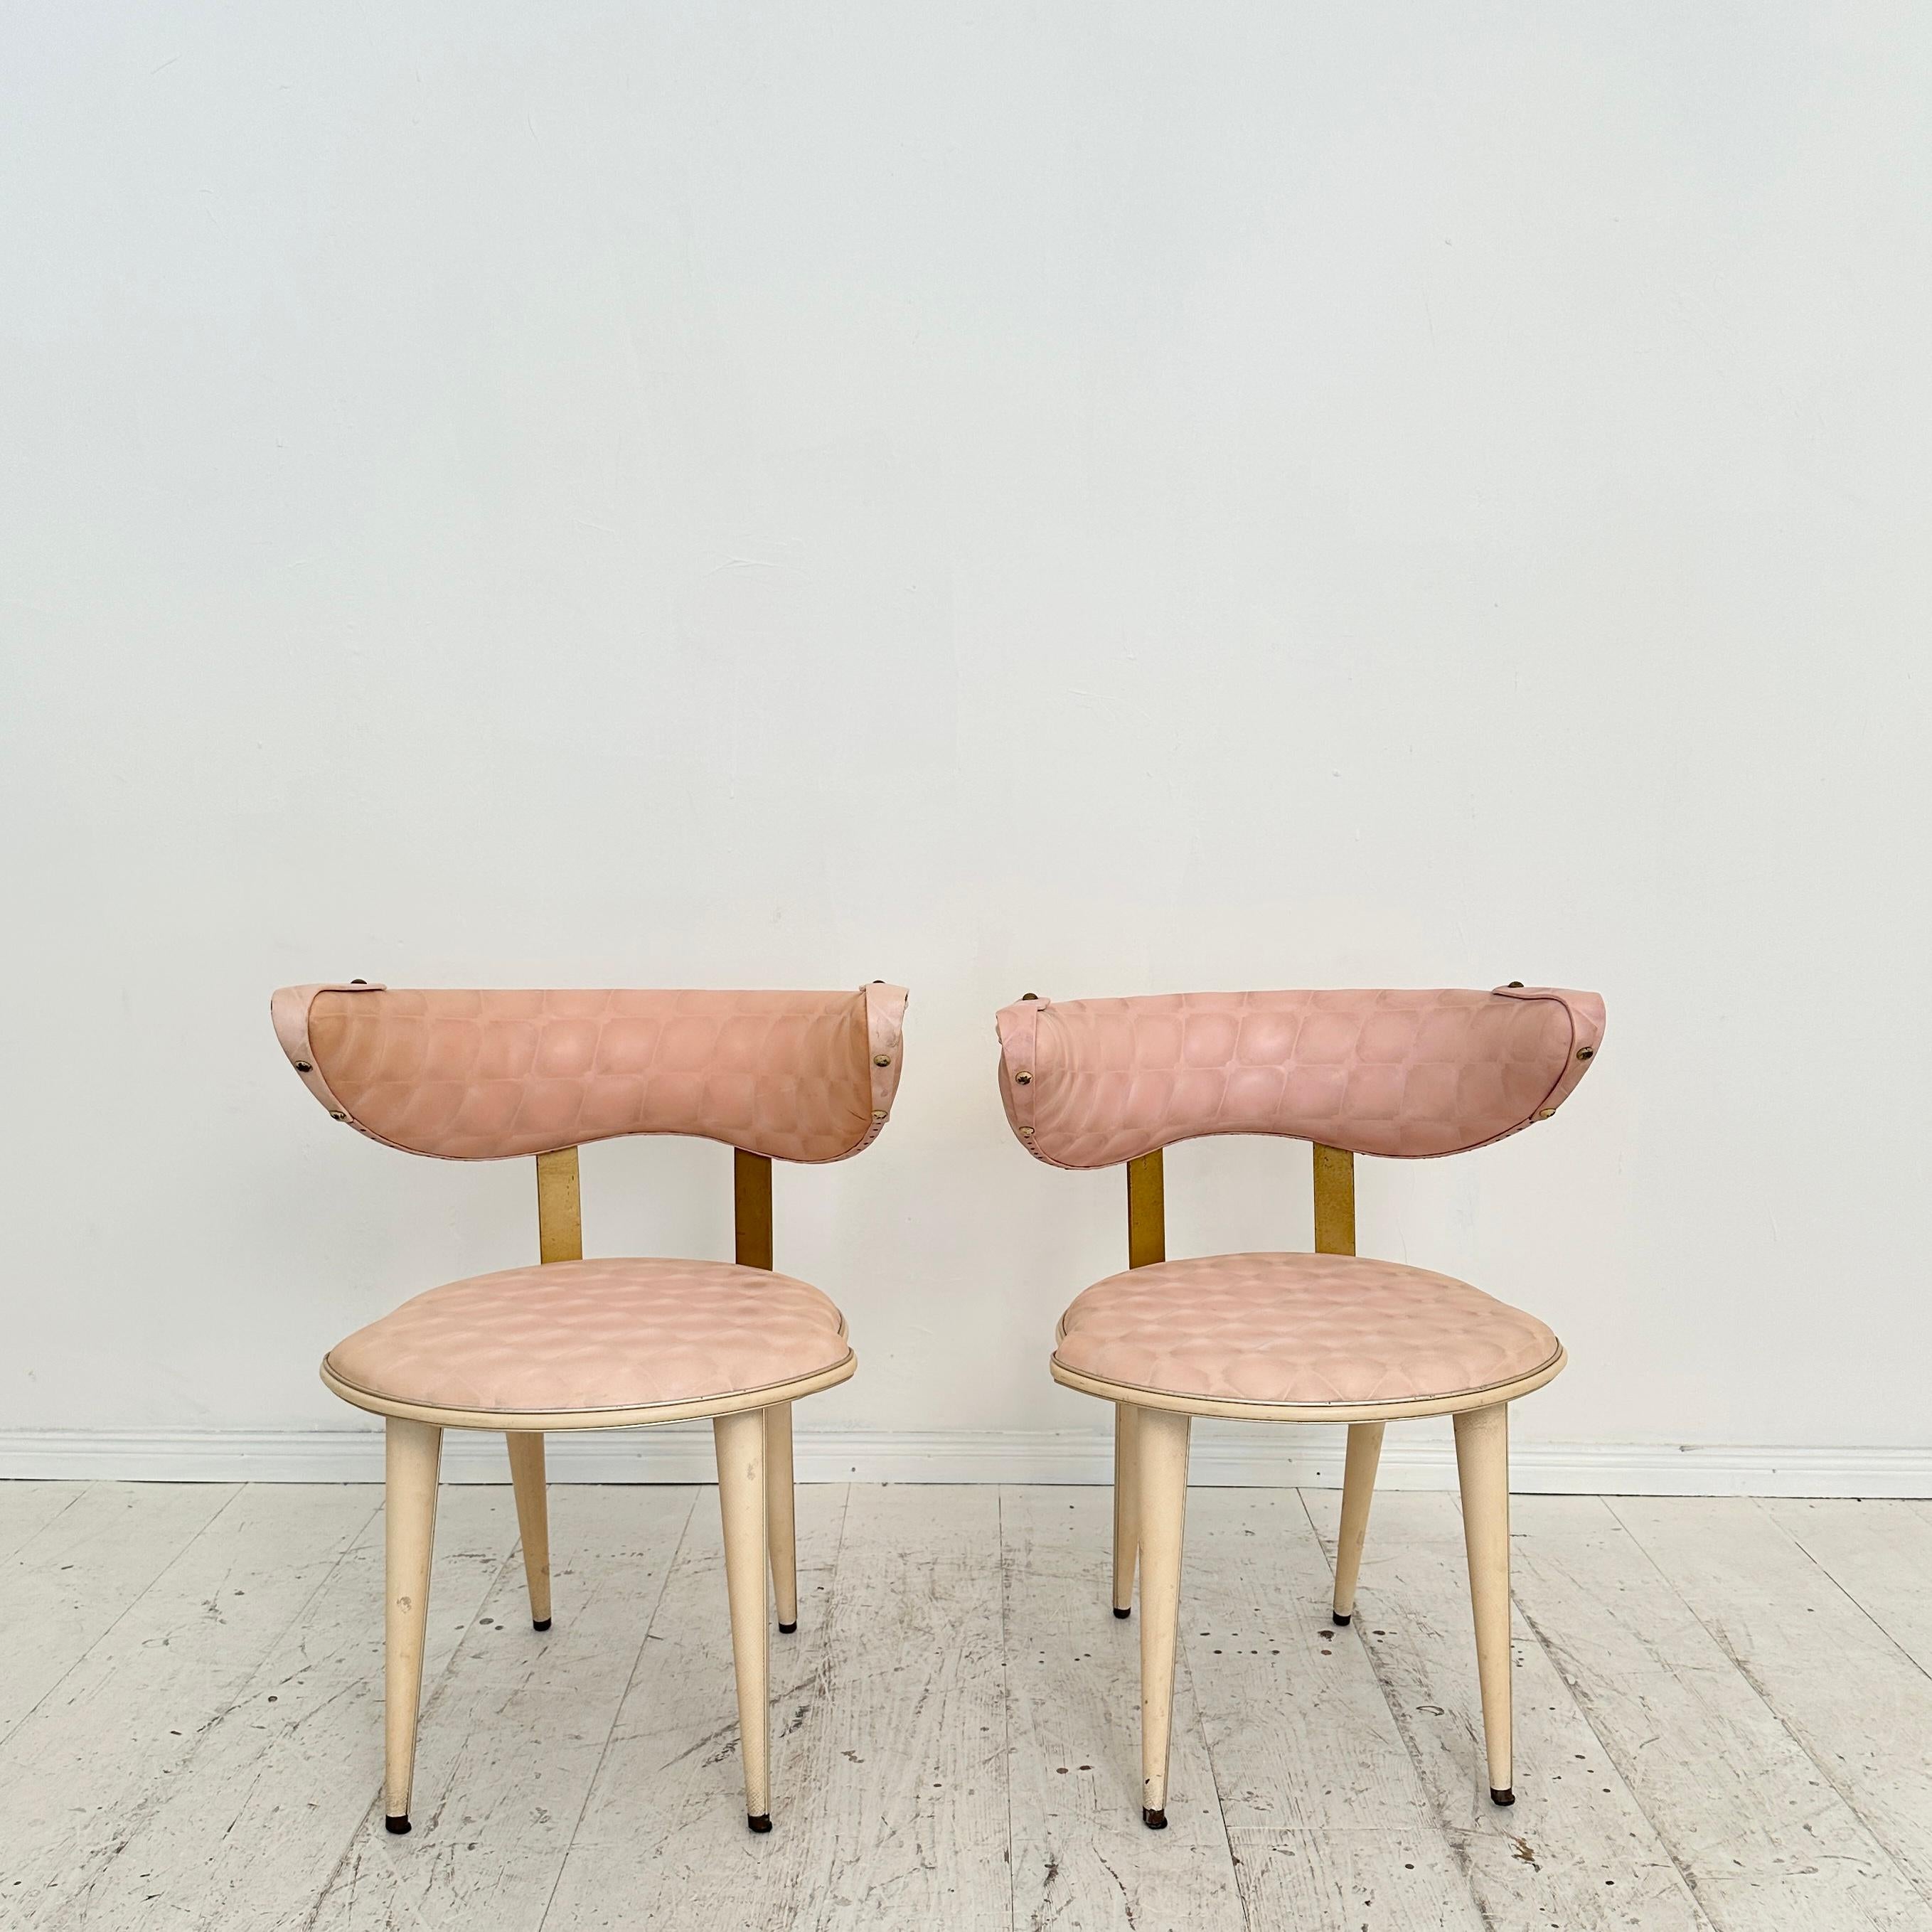 Very rare pair of arm chairs by Umberto Mascagni from the 1950s. The chairs are made of wood and metal and covered in a vinyl.
They are in great original condition.
A unique piece which is a great eye-catcher for your antique, modern, space age or